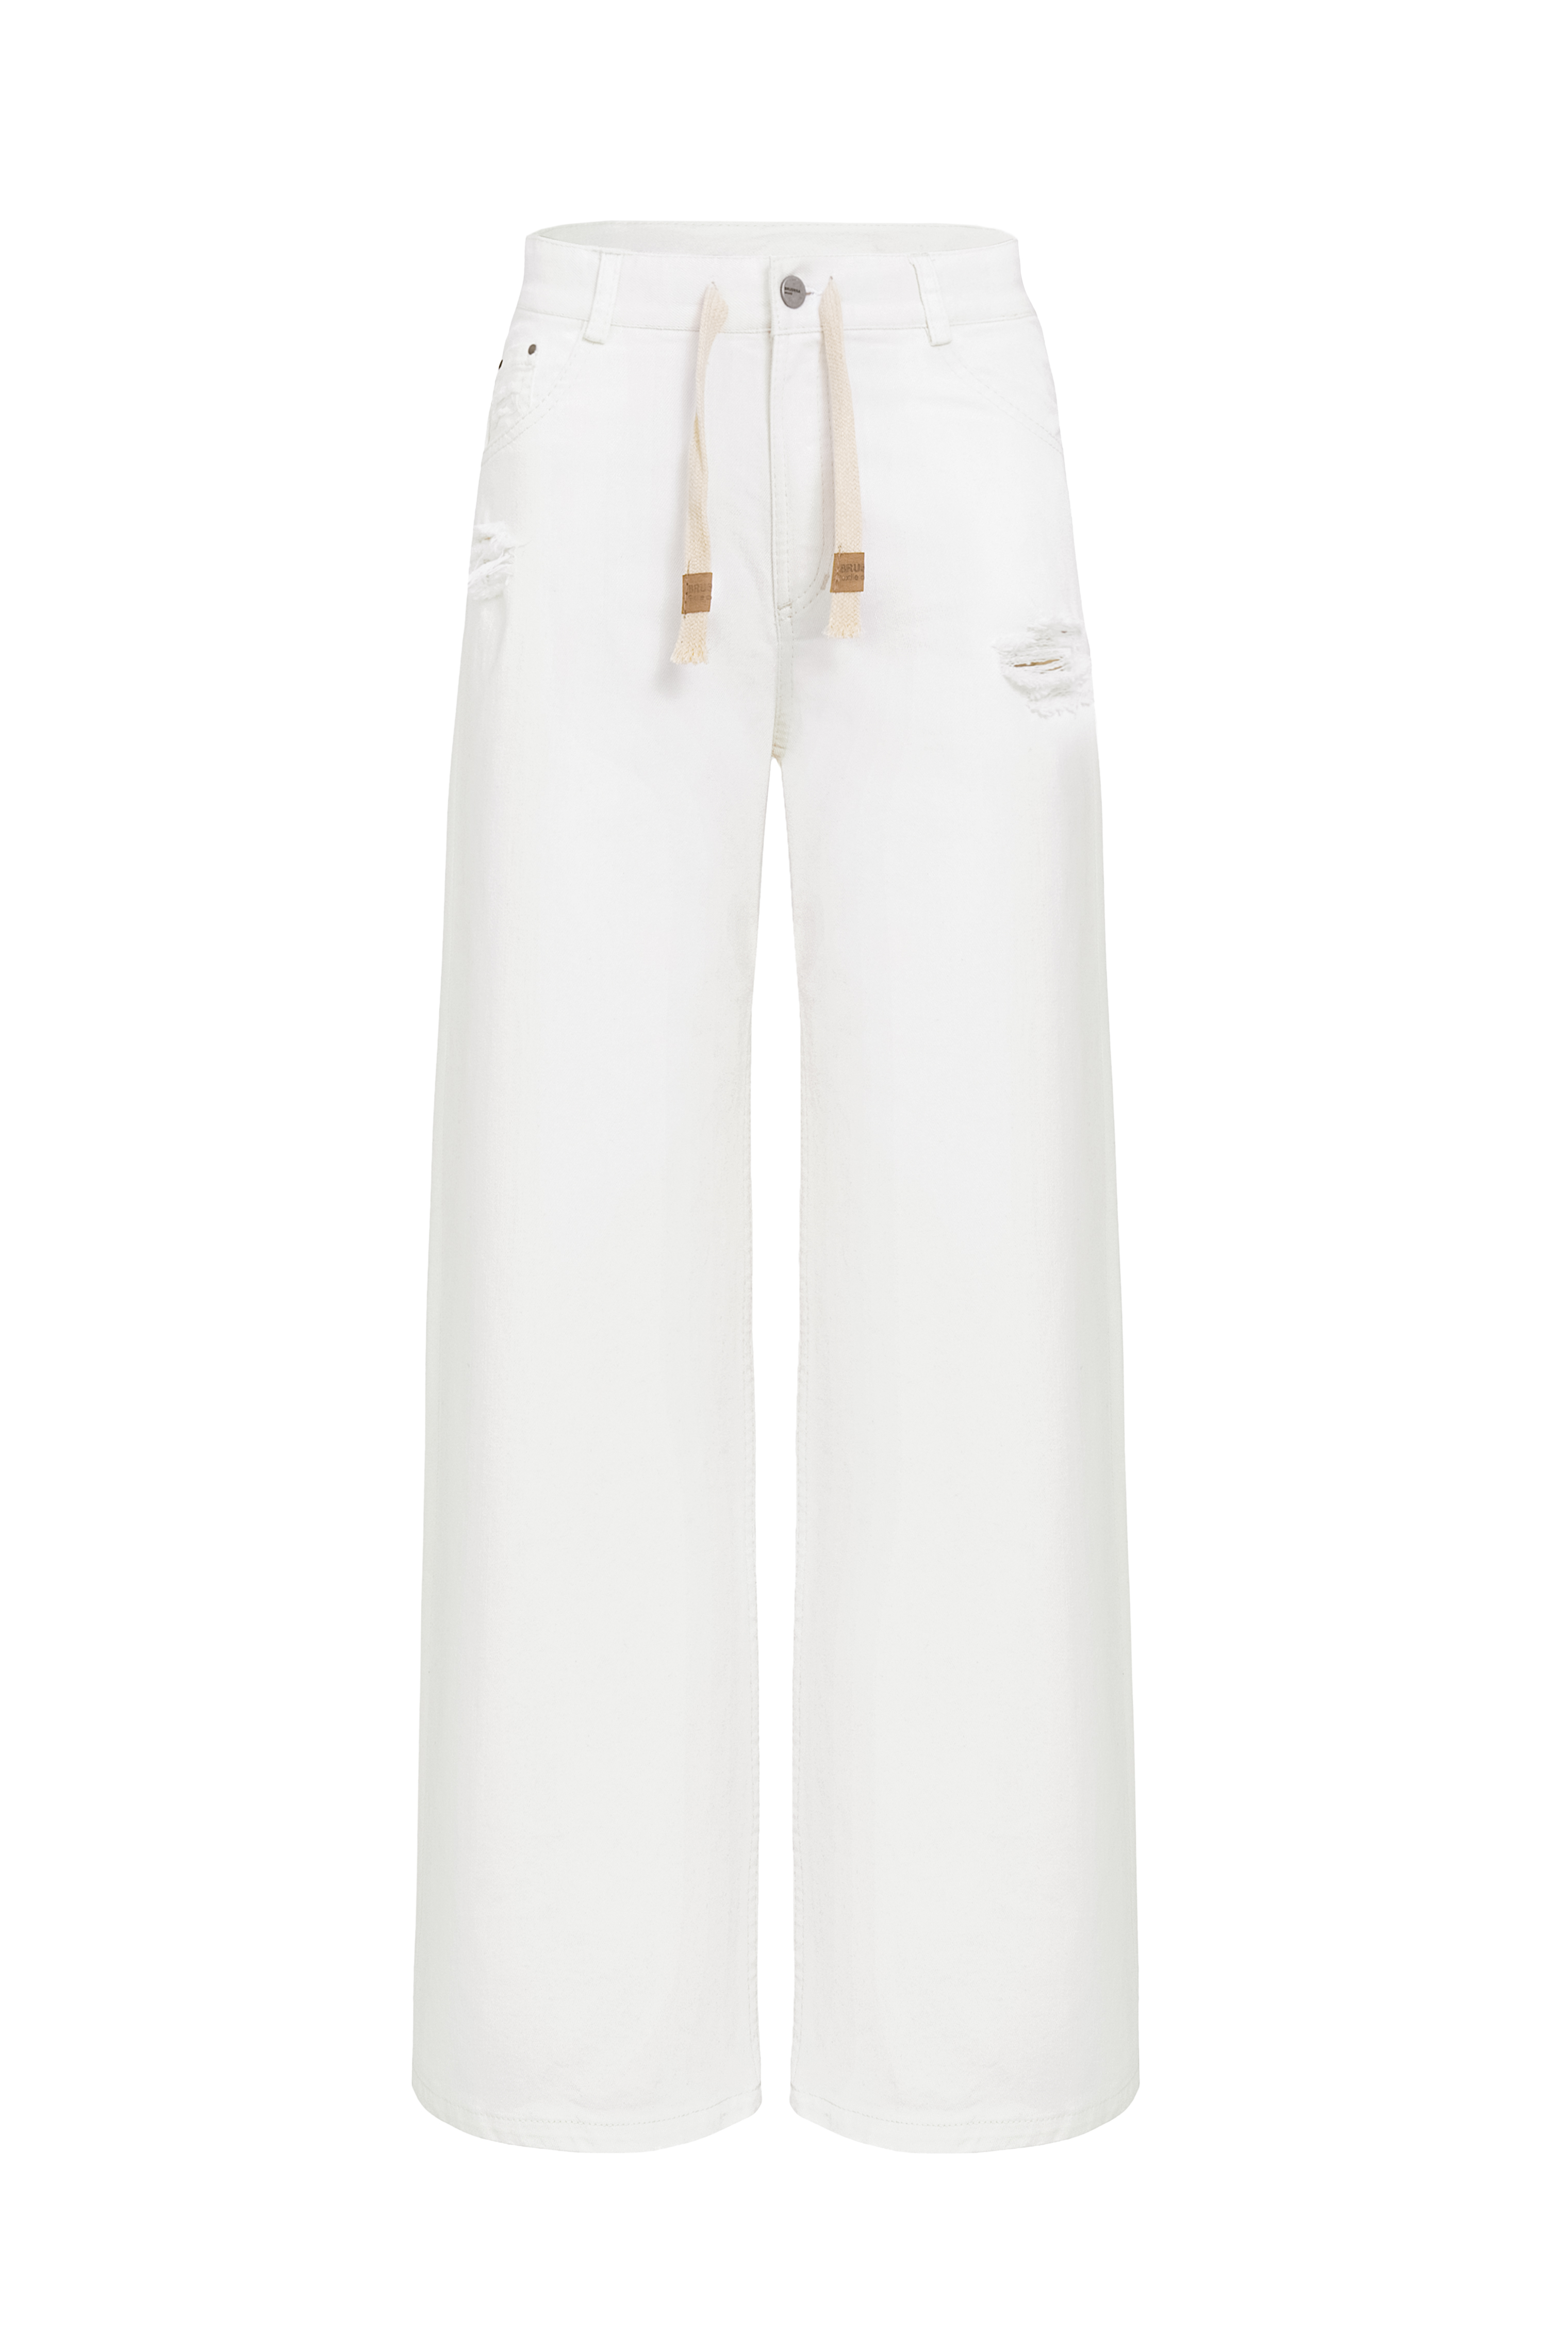 Trousers 4692-02 White from BRUSNiKA